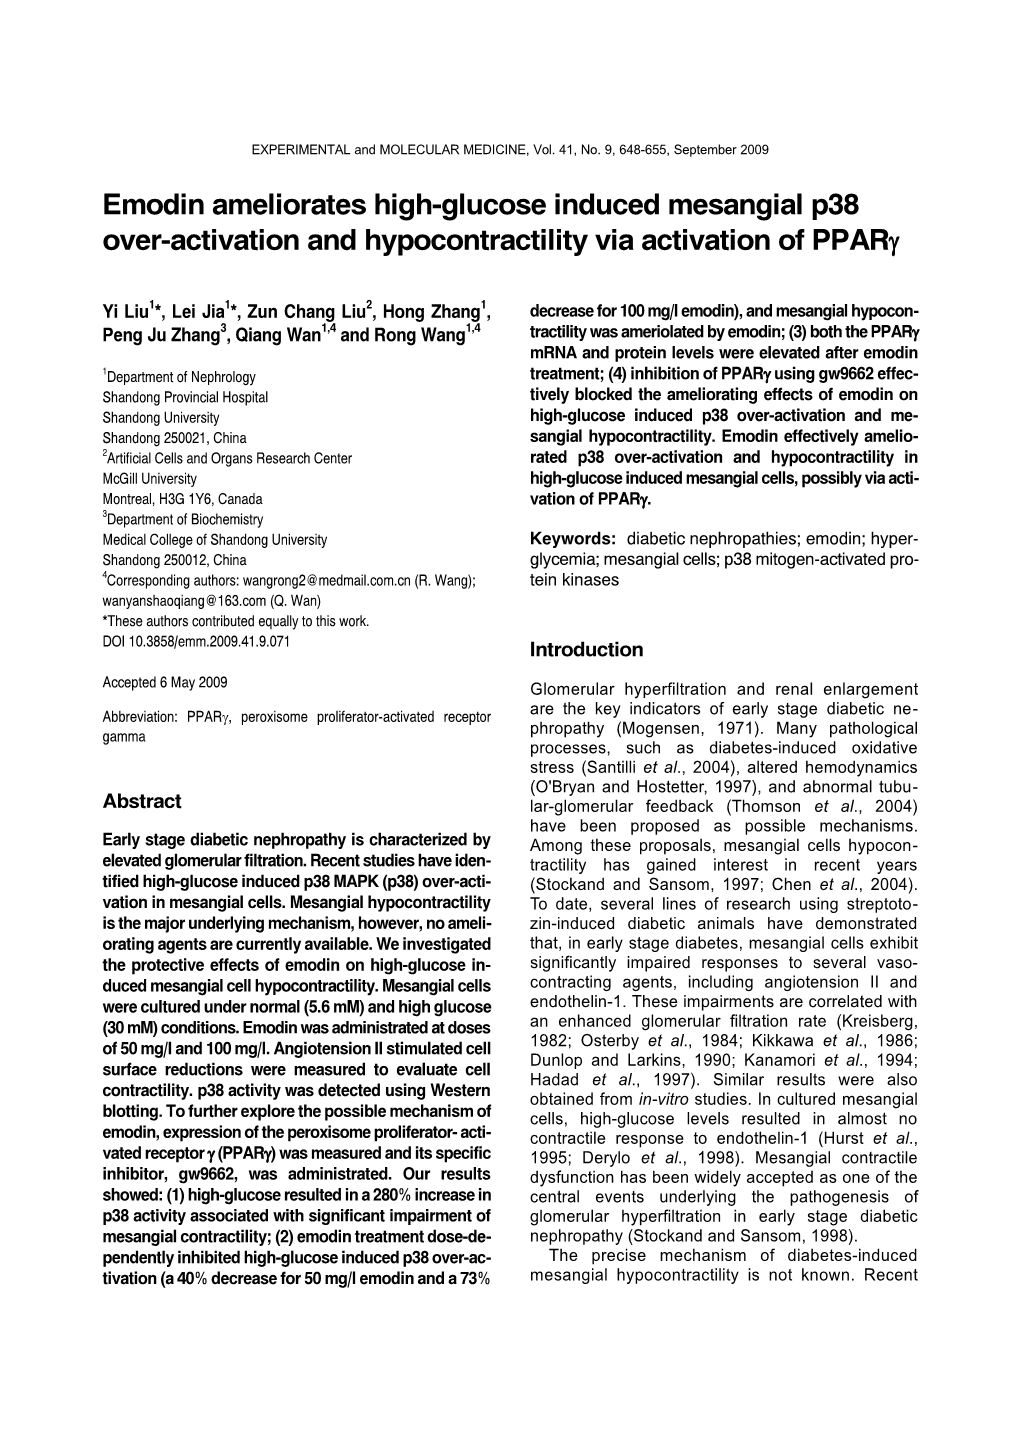 Emodin Ameliorates High-Glucose Induced Mesangial P38 Over-Activation and Hypocontractility Via Activation of Pparγ